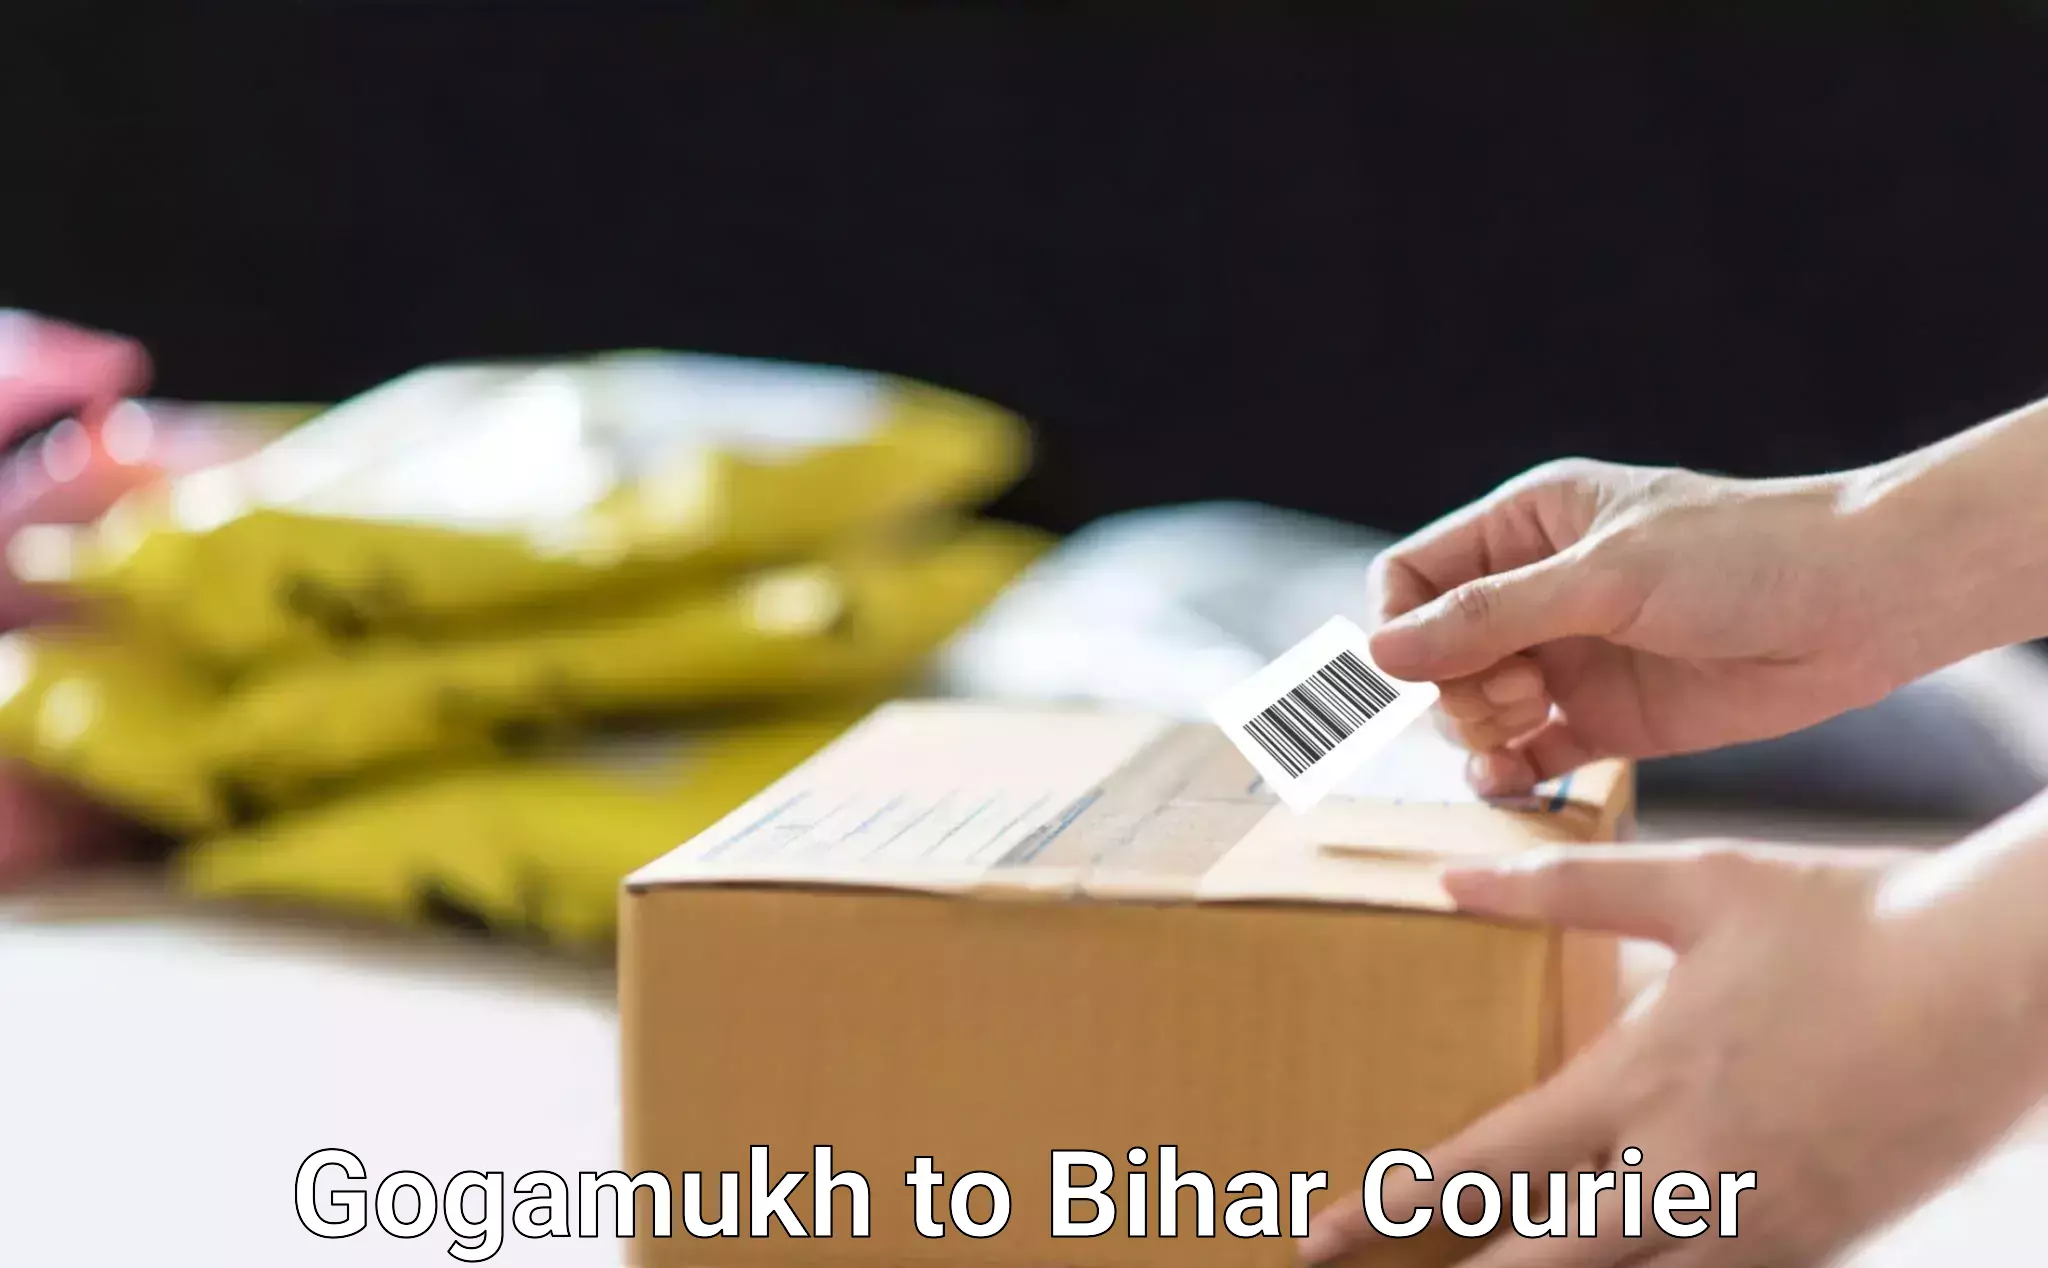 End-to-end delivery Gogamukh to Bihar